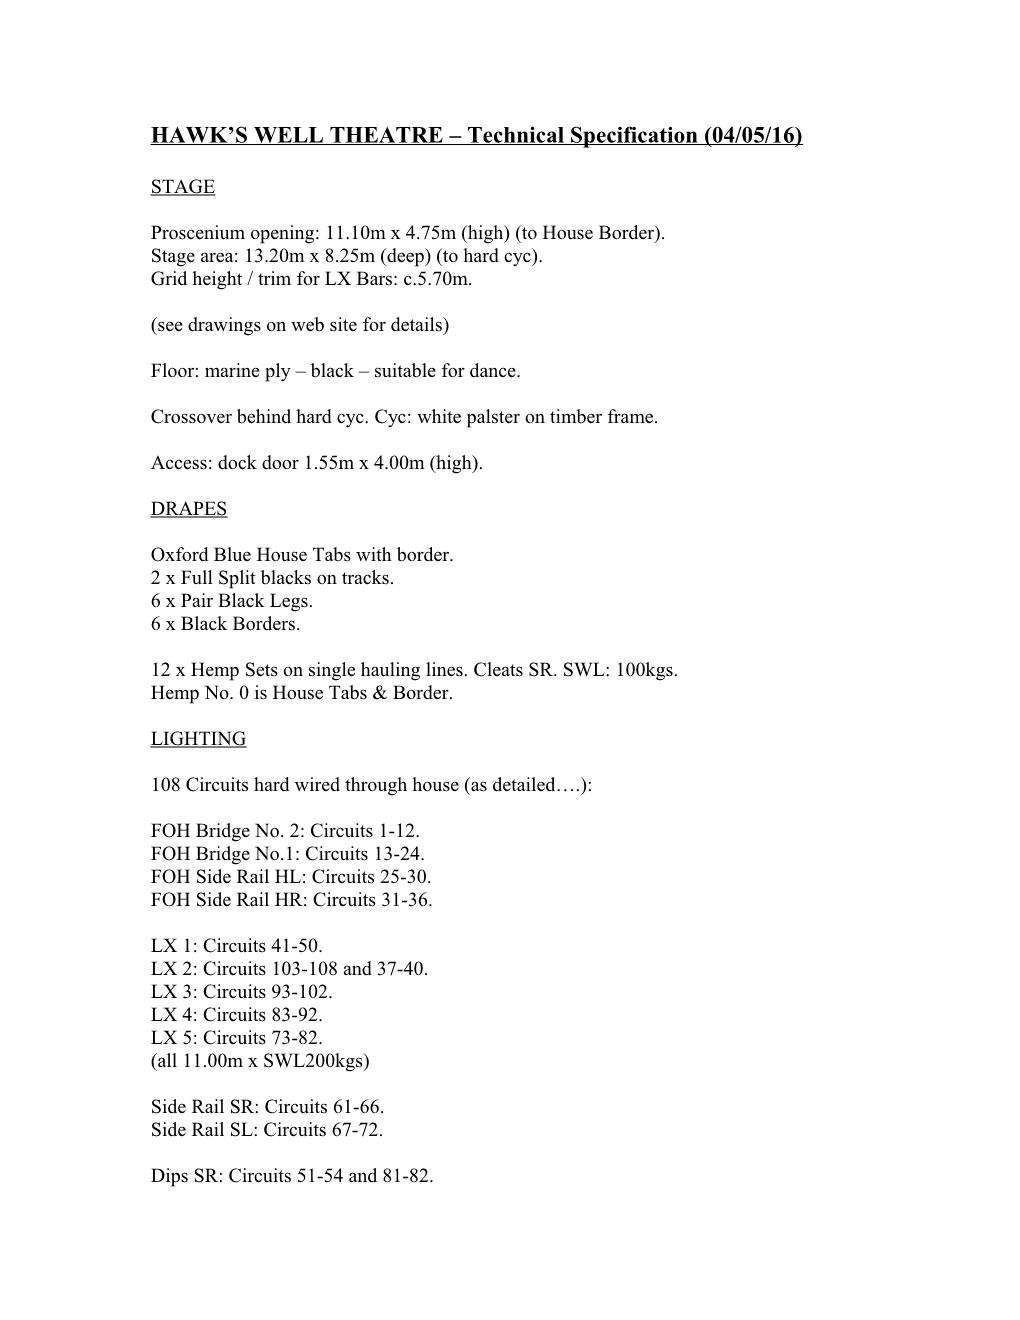 HAWK S WELL THEATRE Technical Specification (30/07/07)